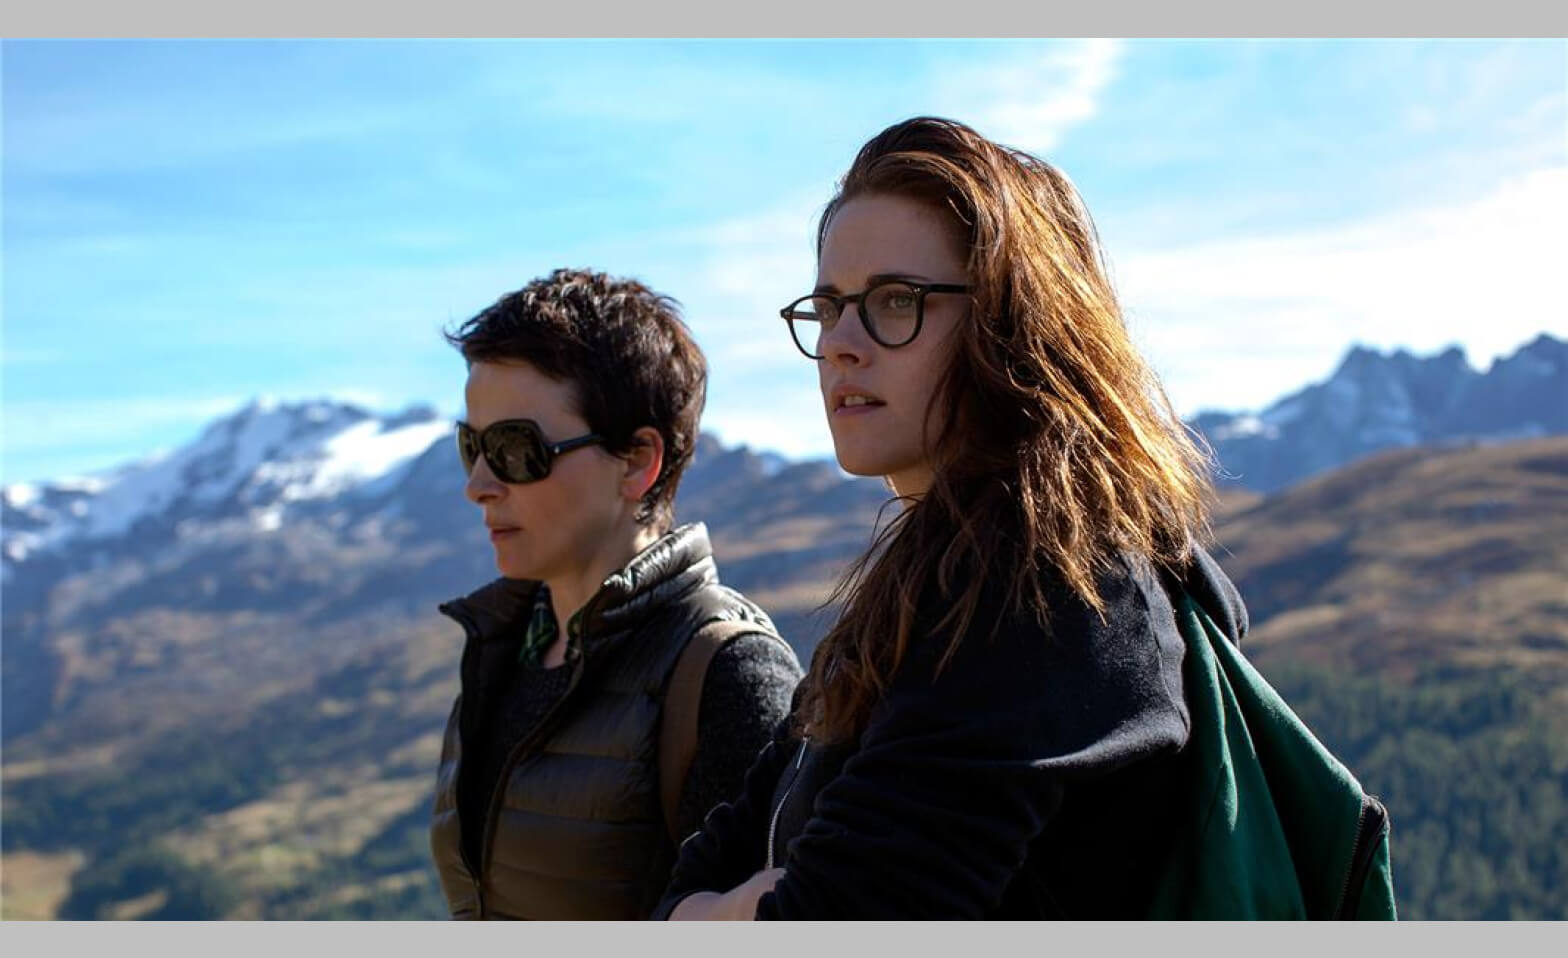 Clouds of Sils Maria Filmpodium Kino Tickets